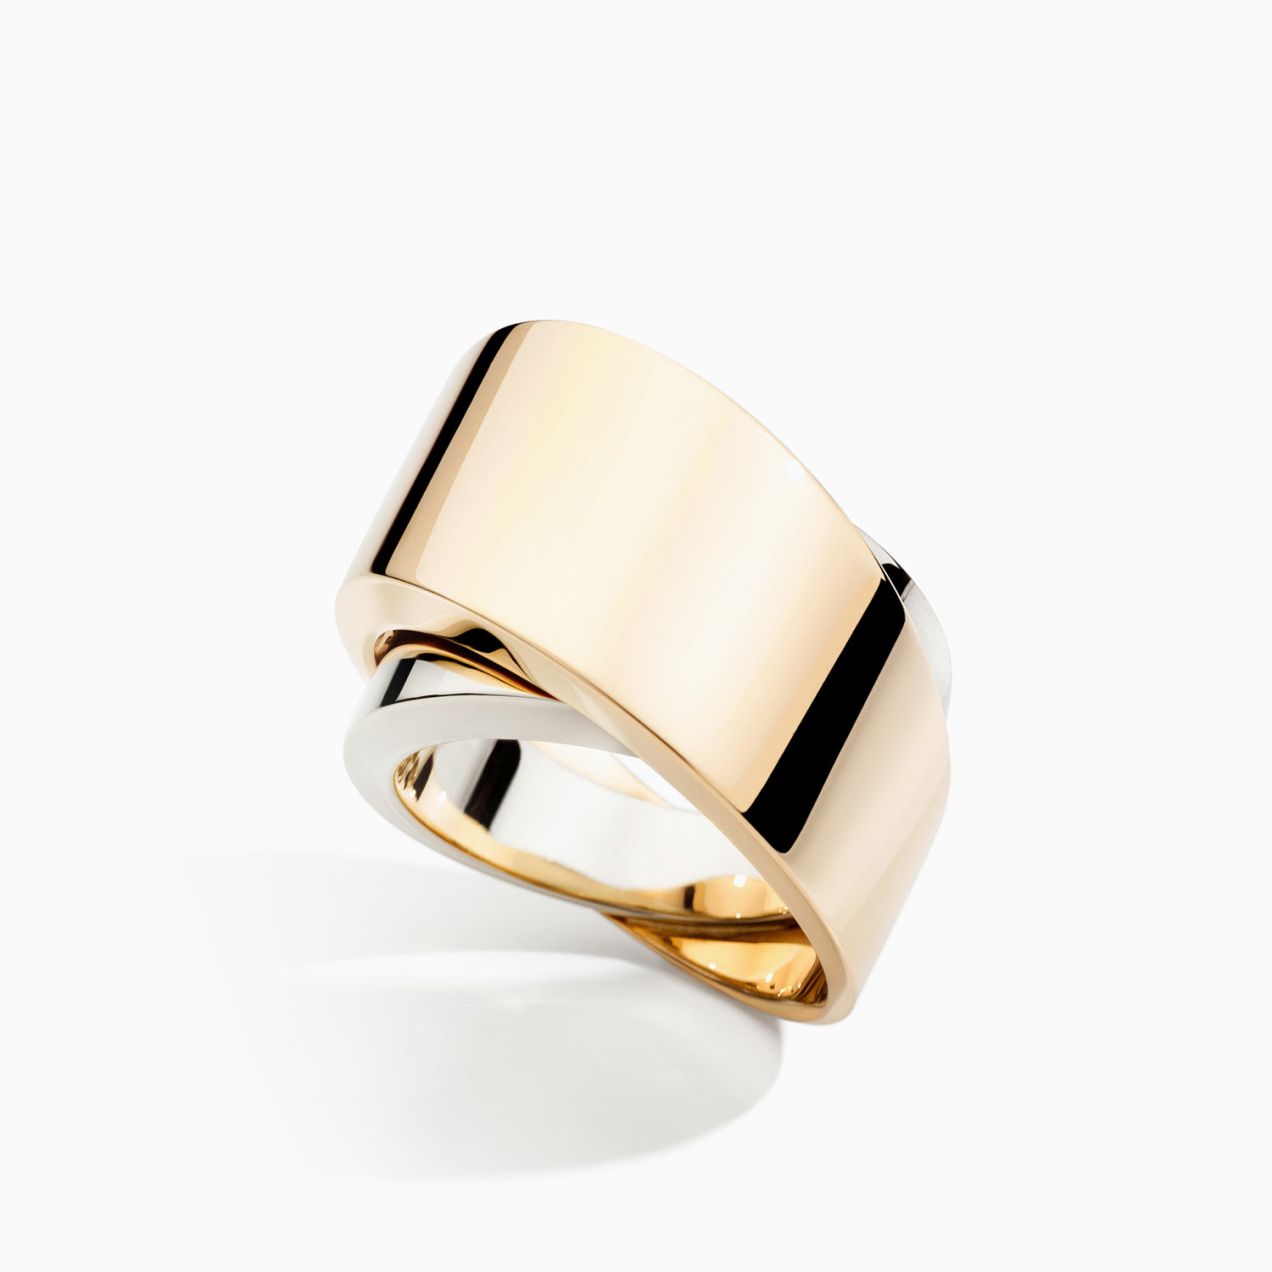 Vhernier tourbillon ring with white gold and rose gold